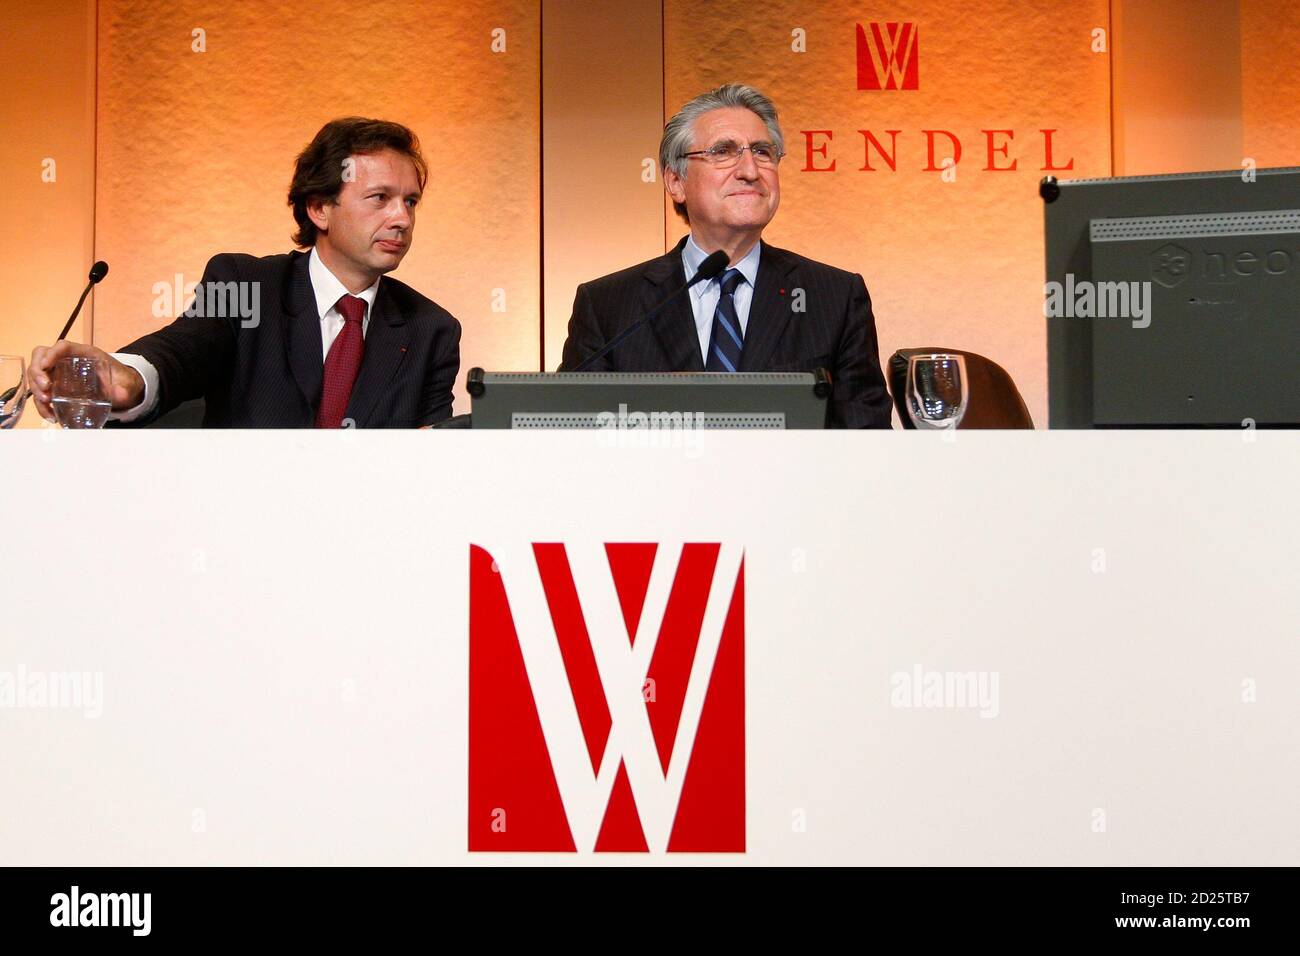 Ernest-Antoine Seilliere (R), chairman of the supervisory board of the  French investment group Wendel and CEO, Jean-Bernard Lafonta, attend the  company's annual shareholders meeting in Paris June 9, 2008. REUTERS/Benoit  Tessier (FRANCE